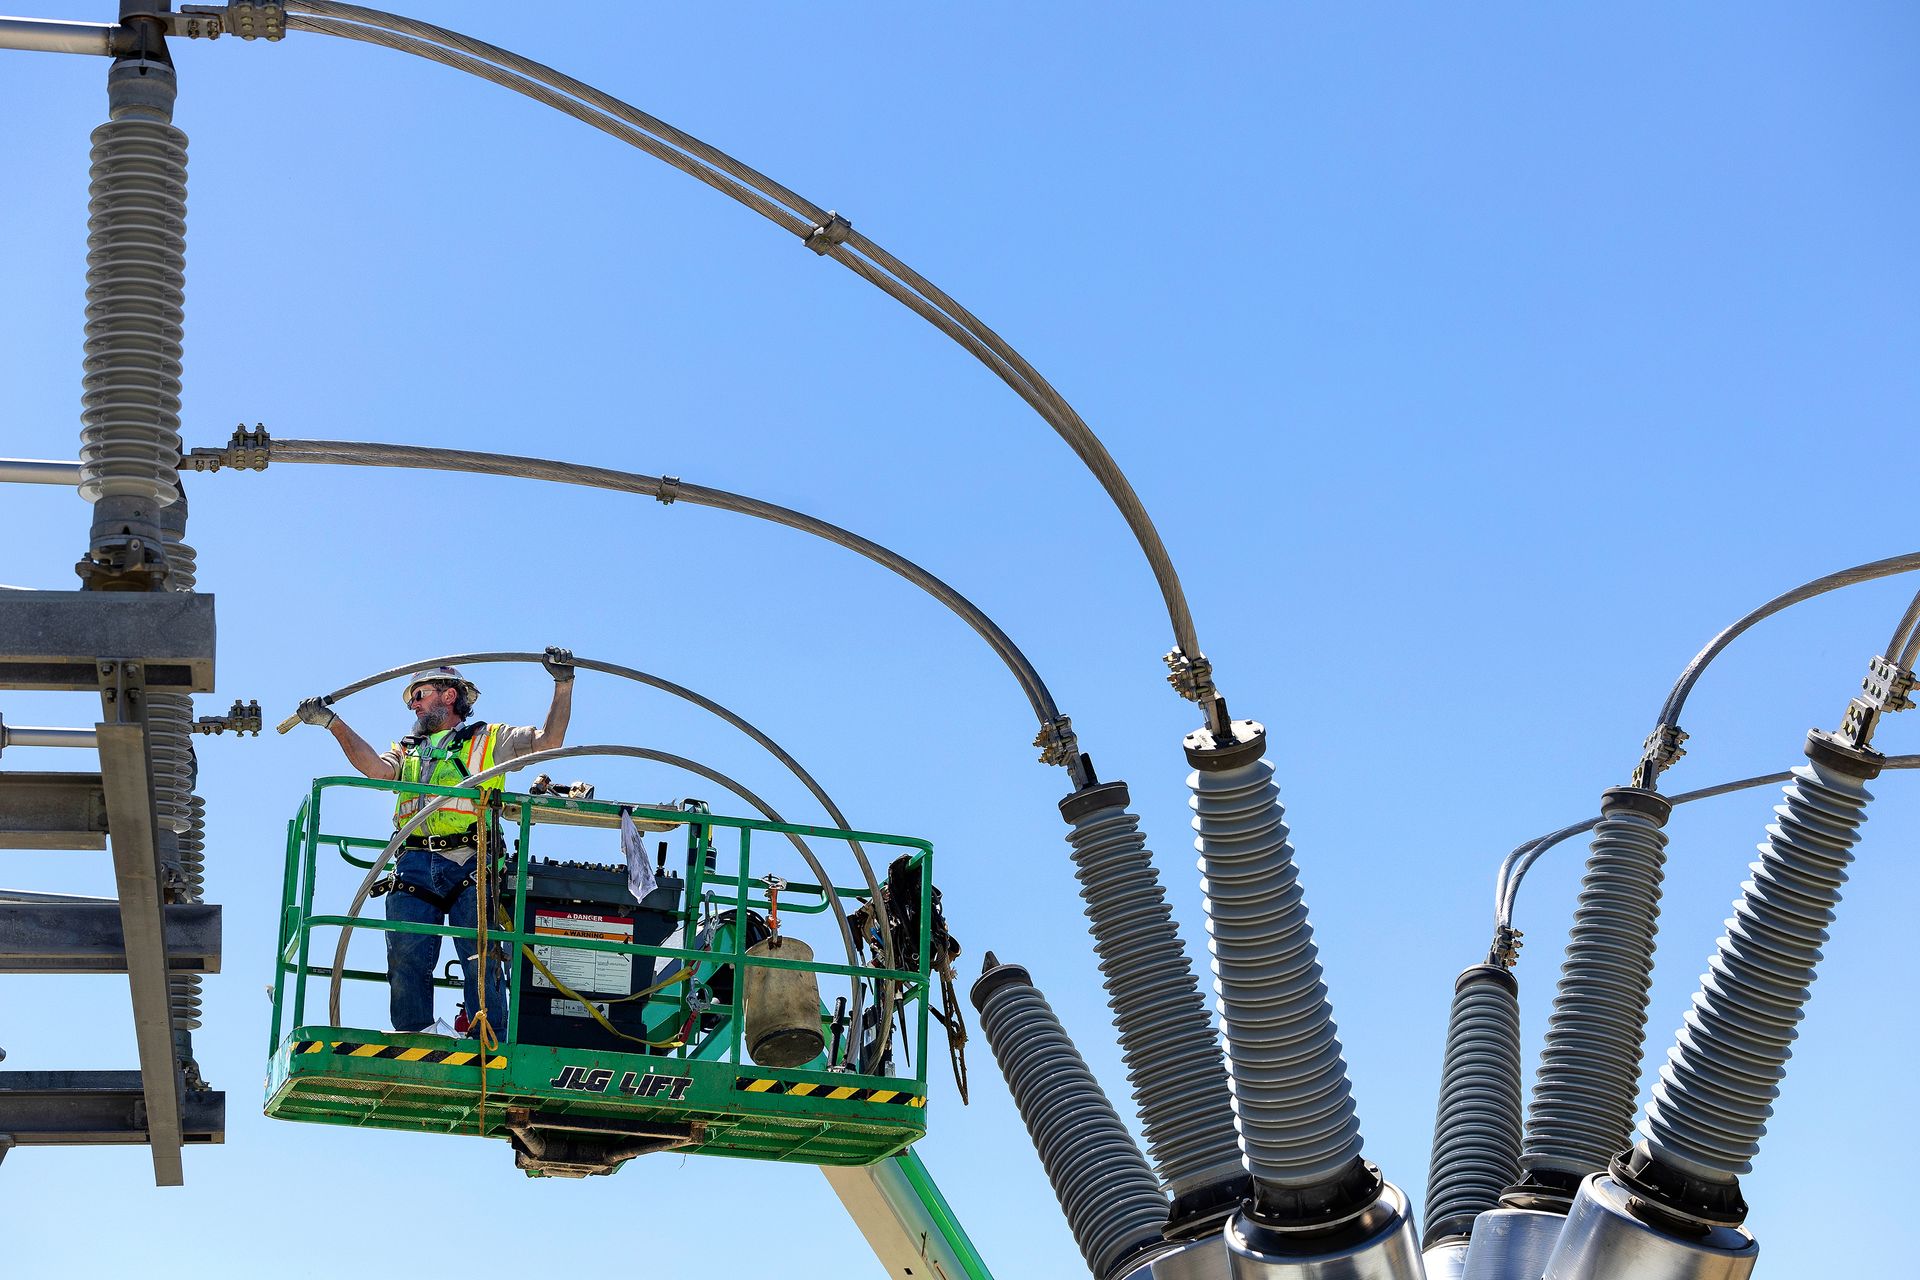 A utility worker installs electric lines in a new electric substation.